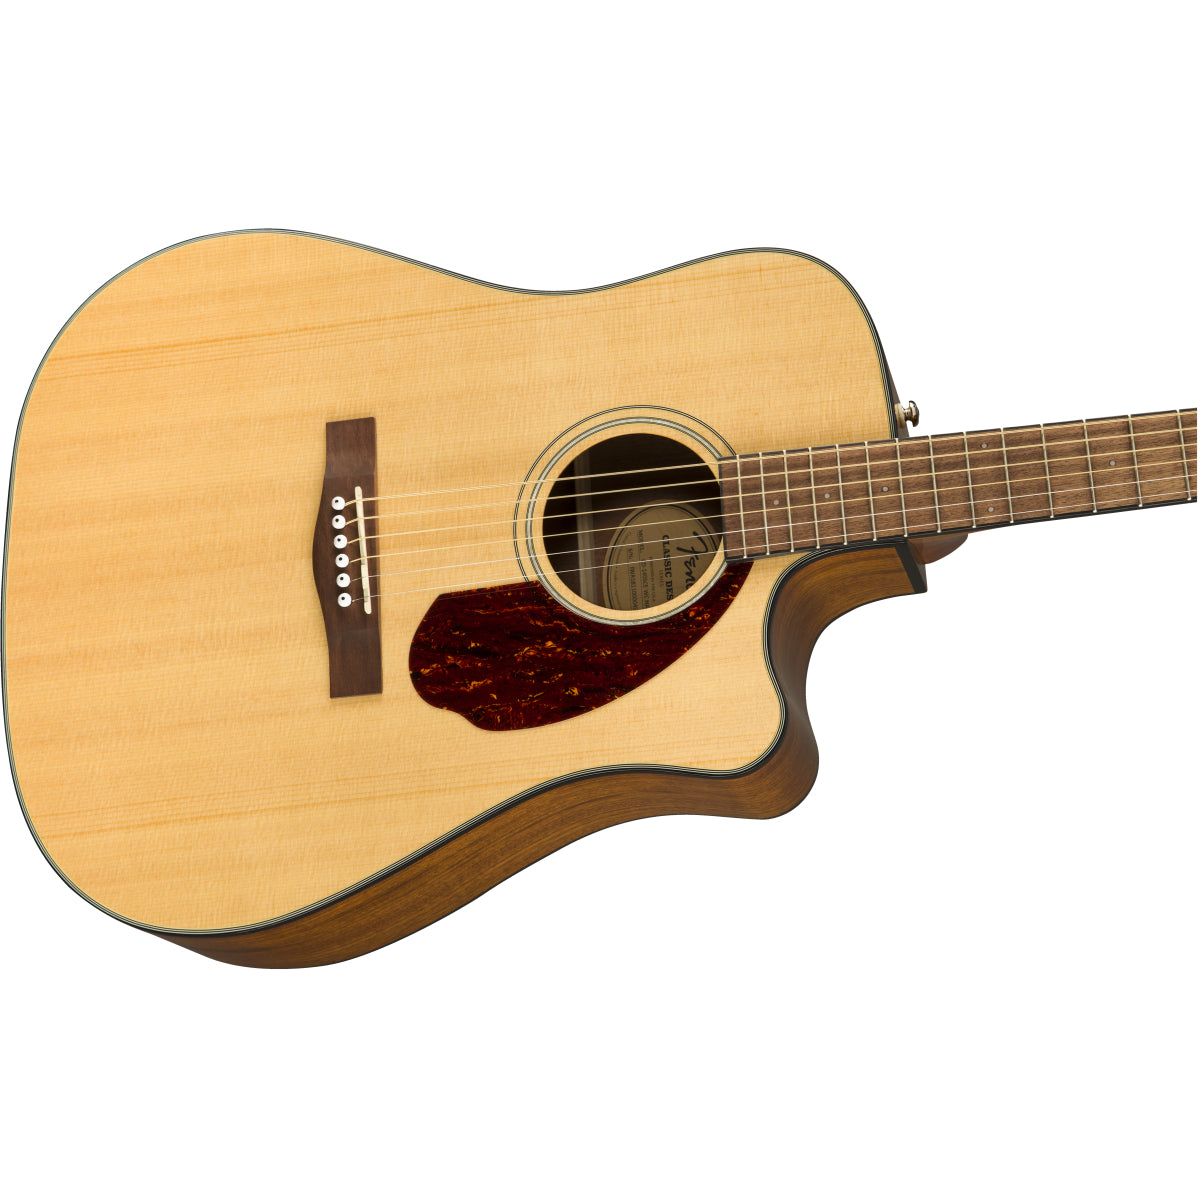 CD-140 SCE - Electro-acoustic Dreadnought Cutaway With Case - Natural